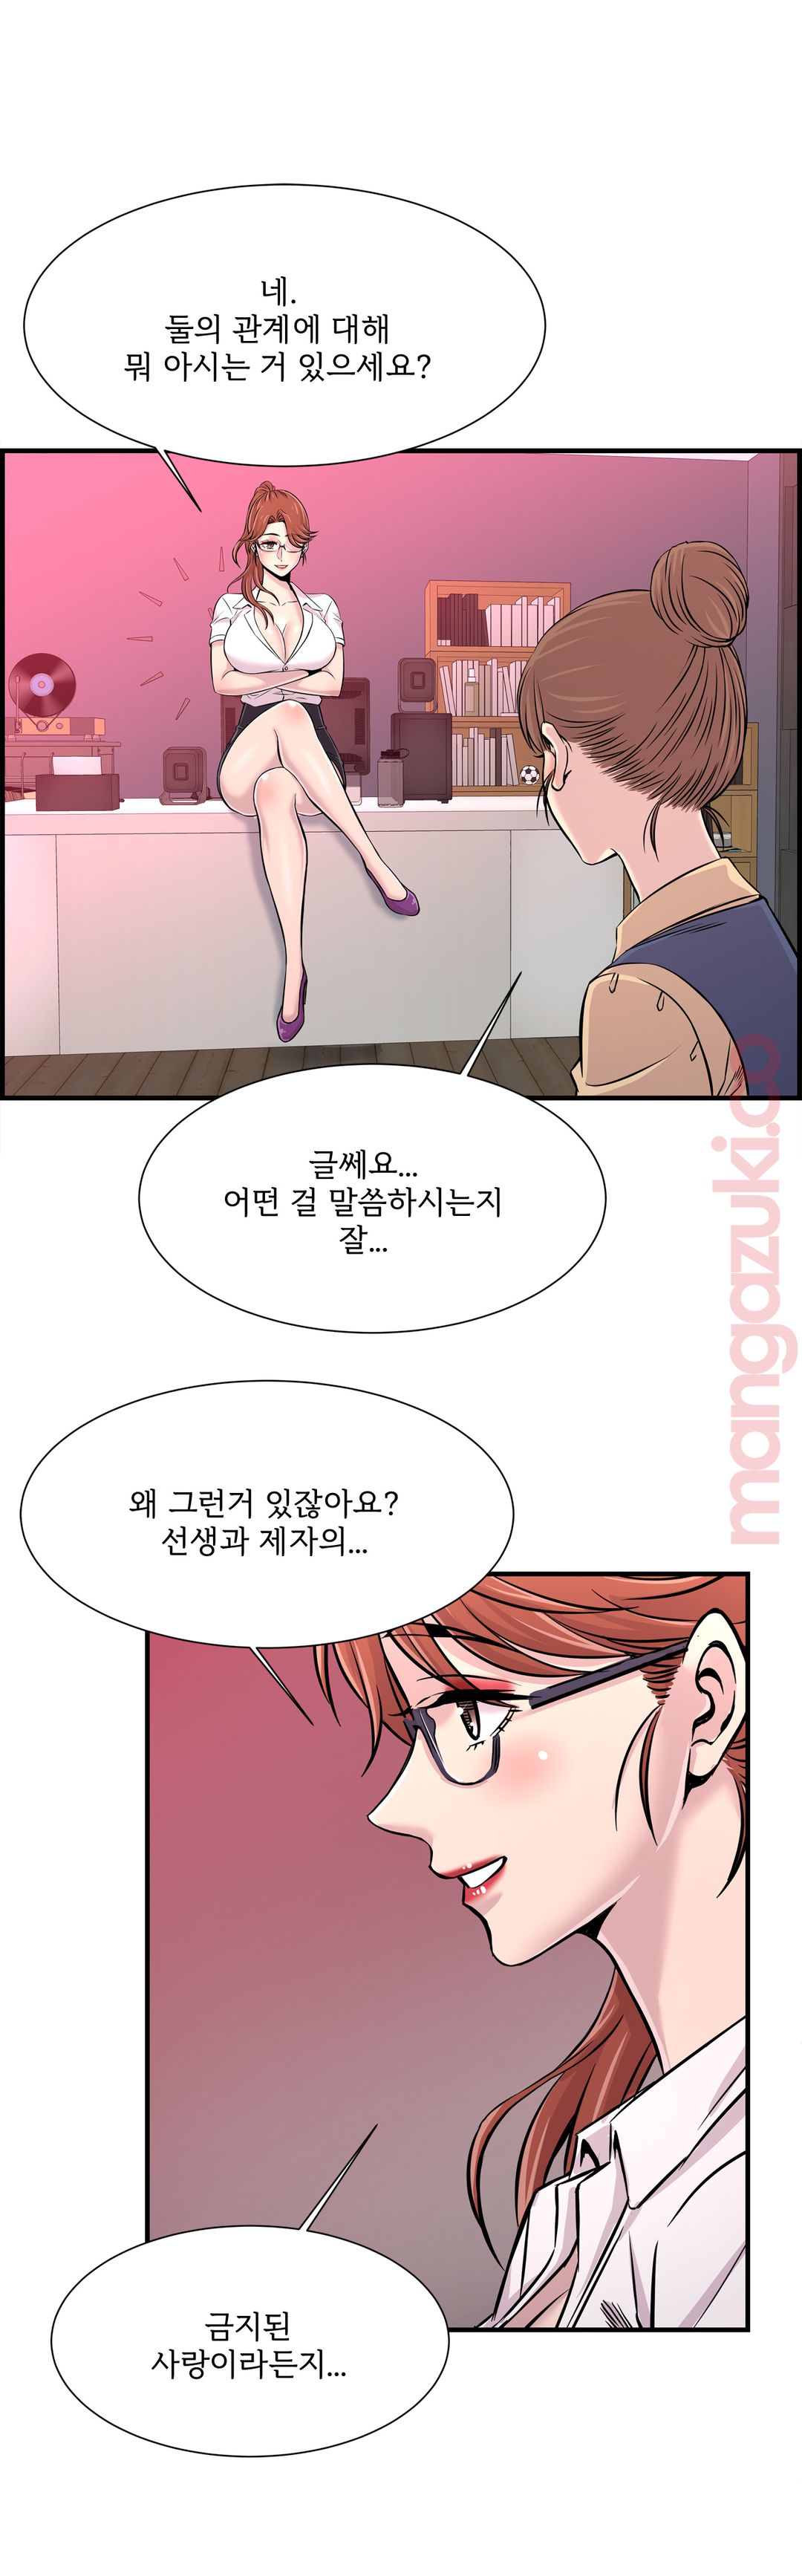 Cram School Scandal Raw - Chapter 25 Page 2